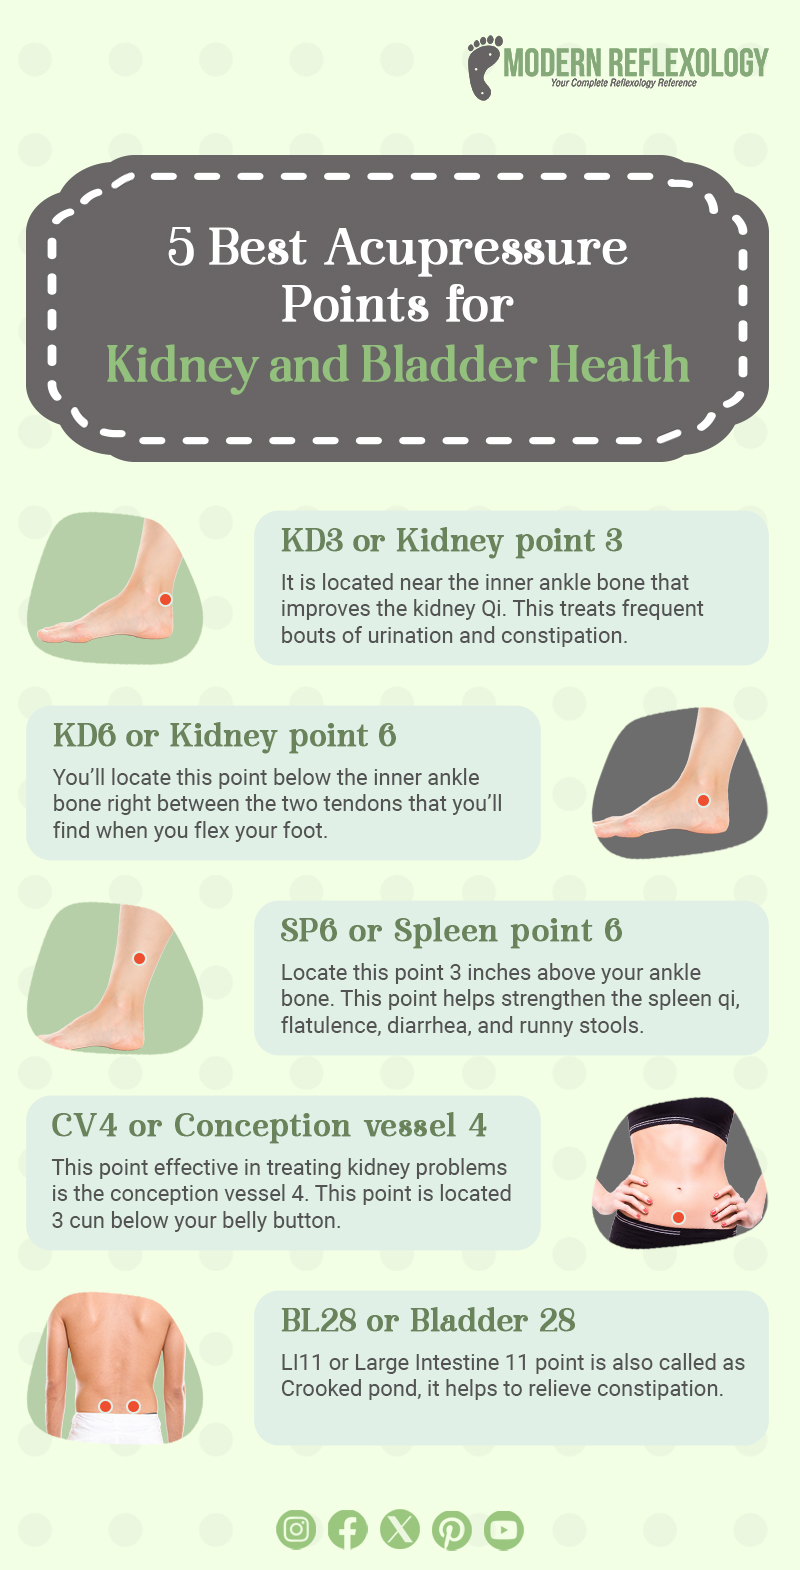 Infographic Best Acupressure Points for Kidney and Bladder Health